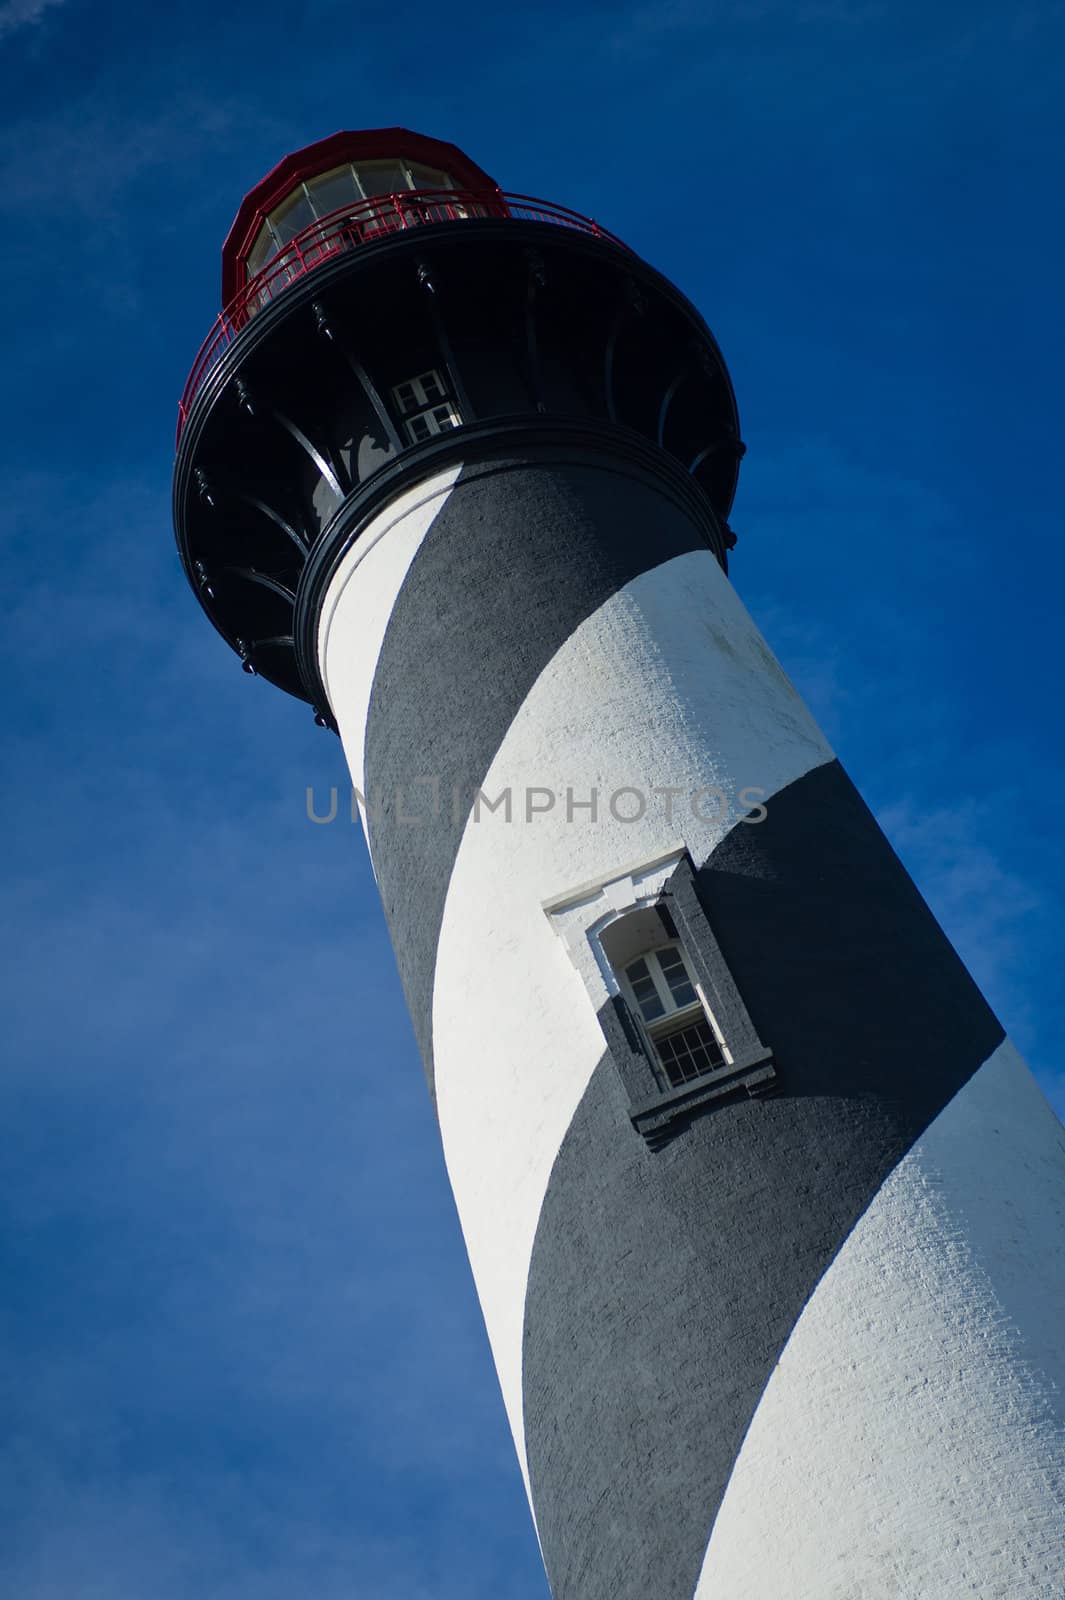 St Augustine Lighthouse by katiesmithphotos